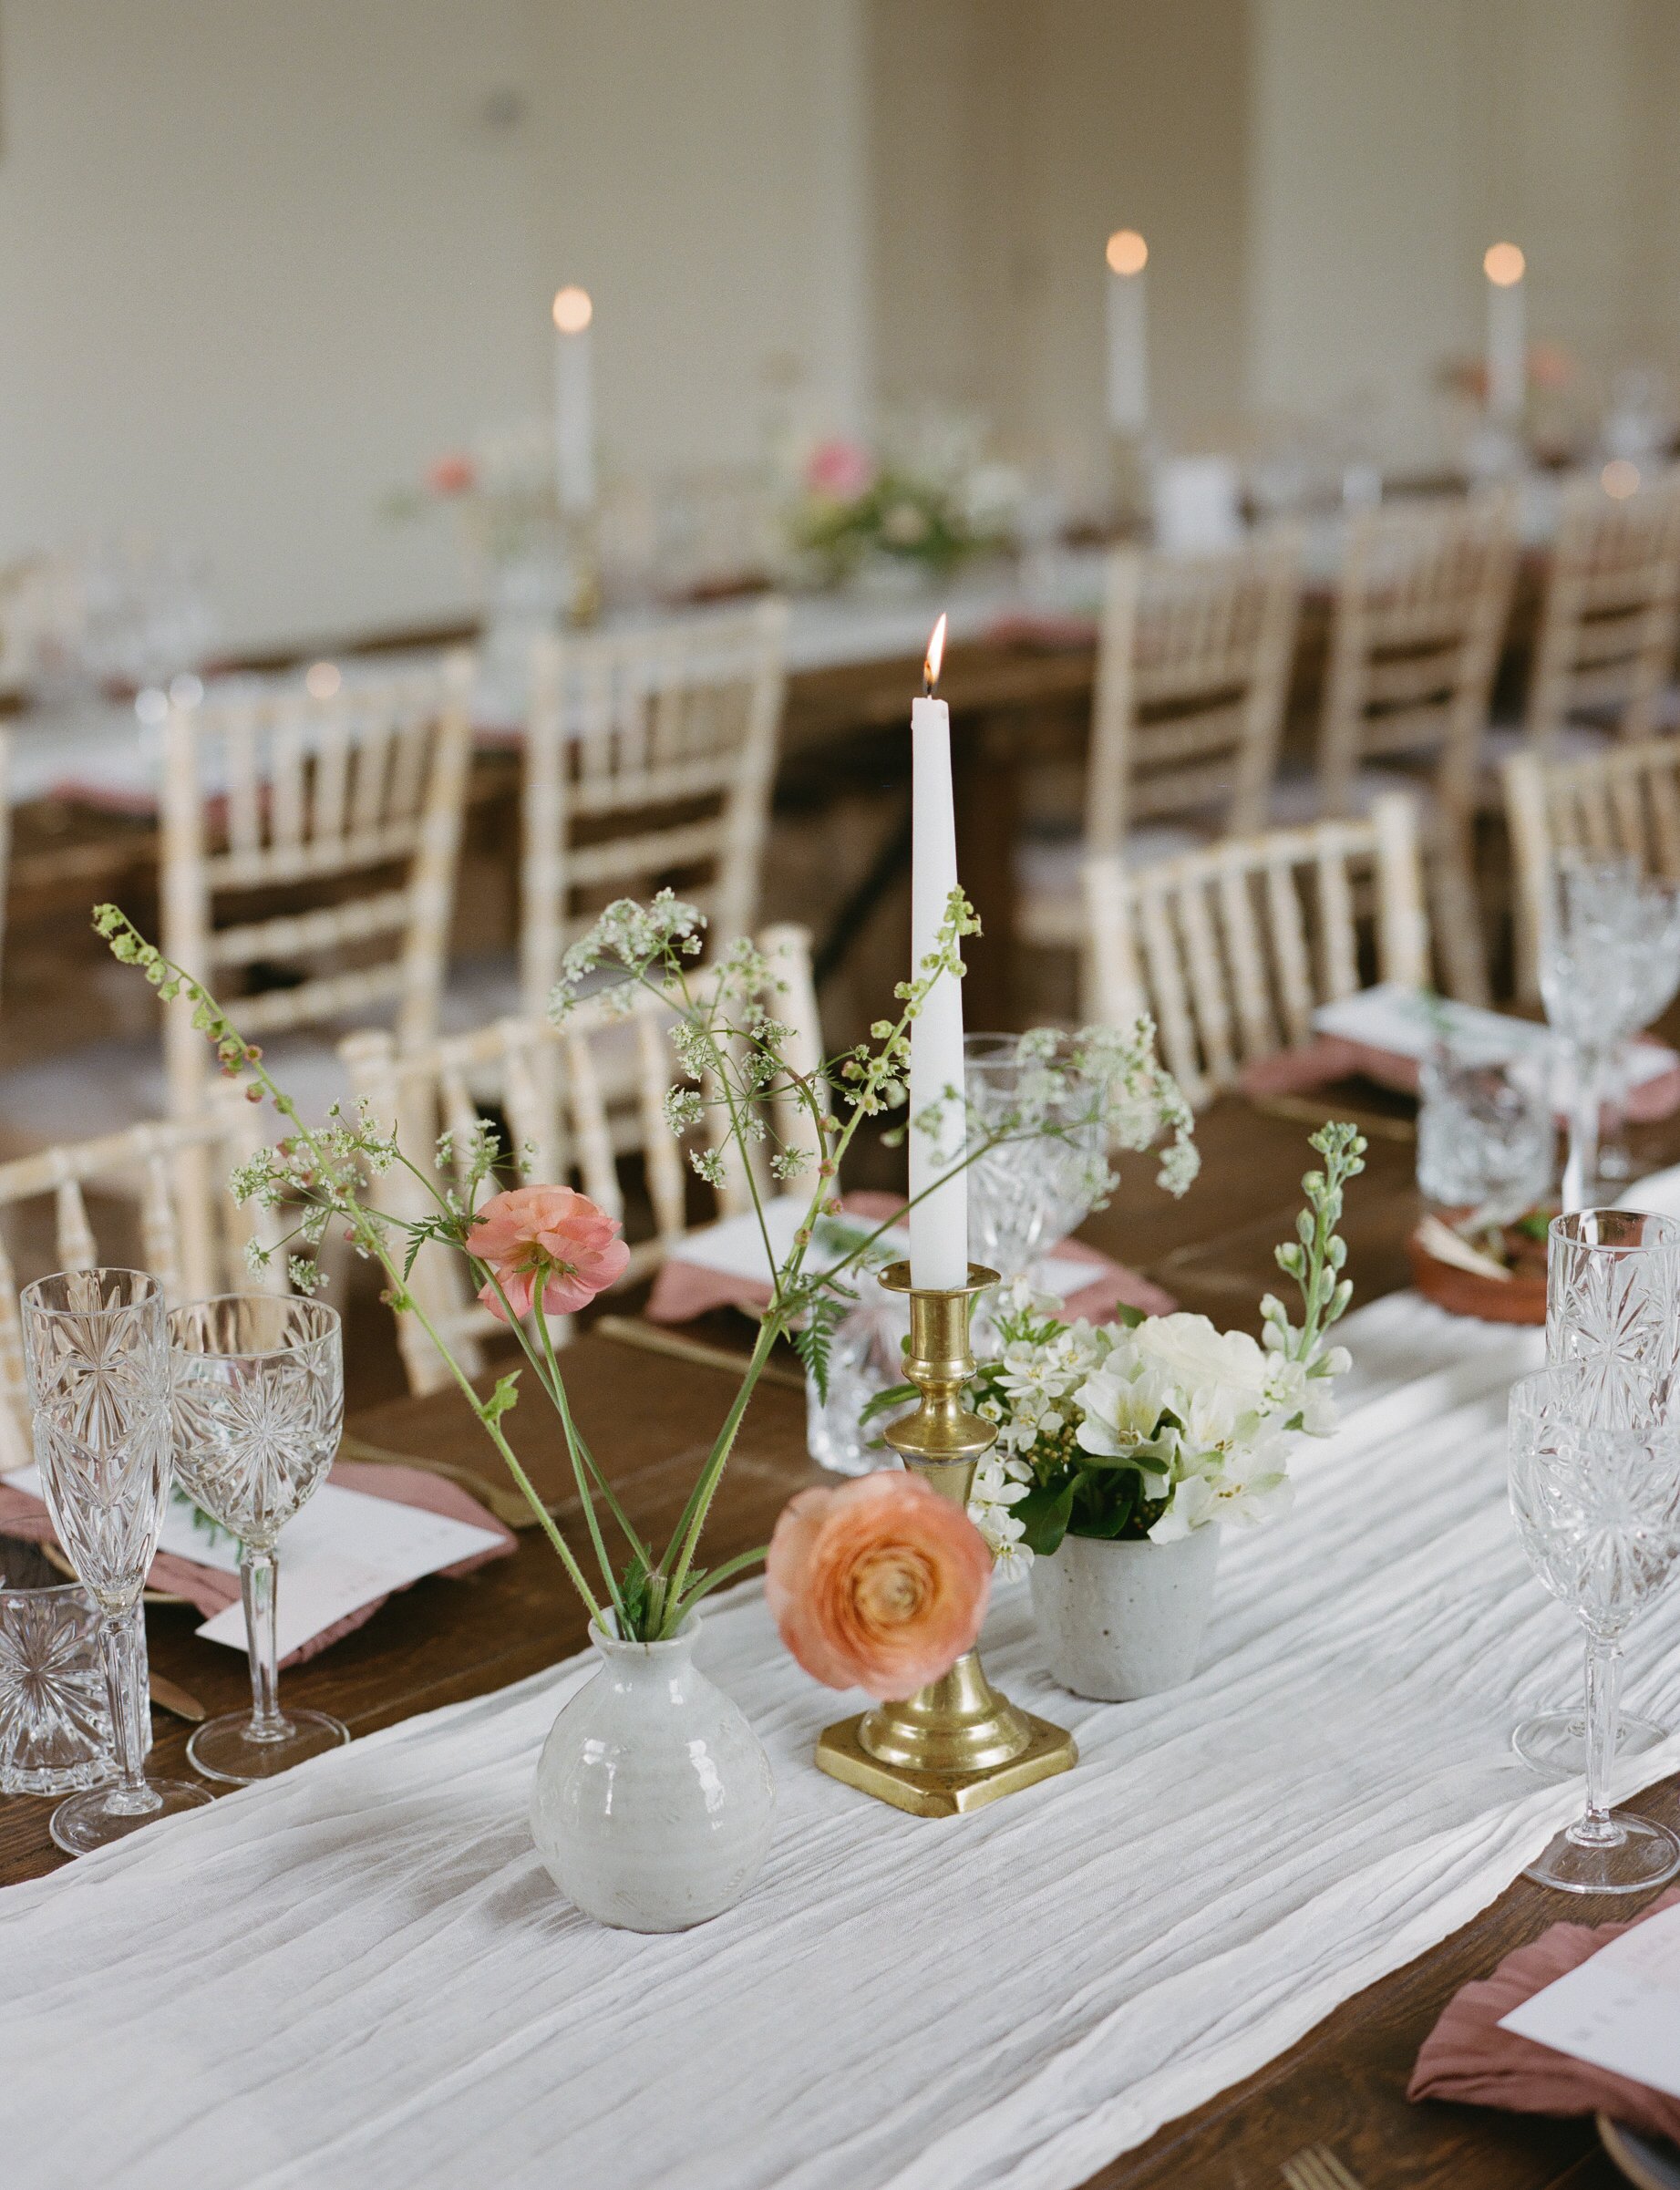 Tapered candles and seasonal flowers  for spring wedding